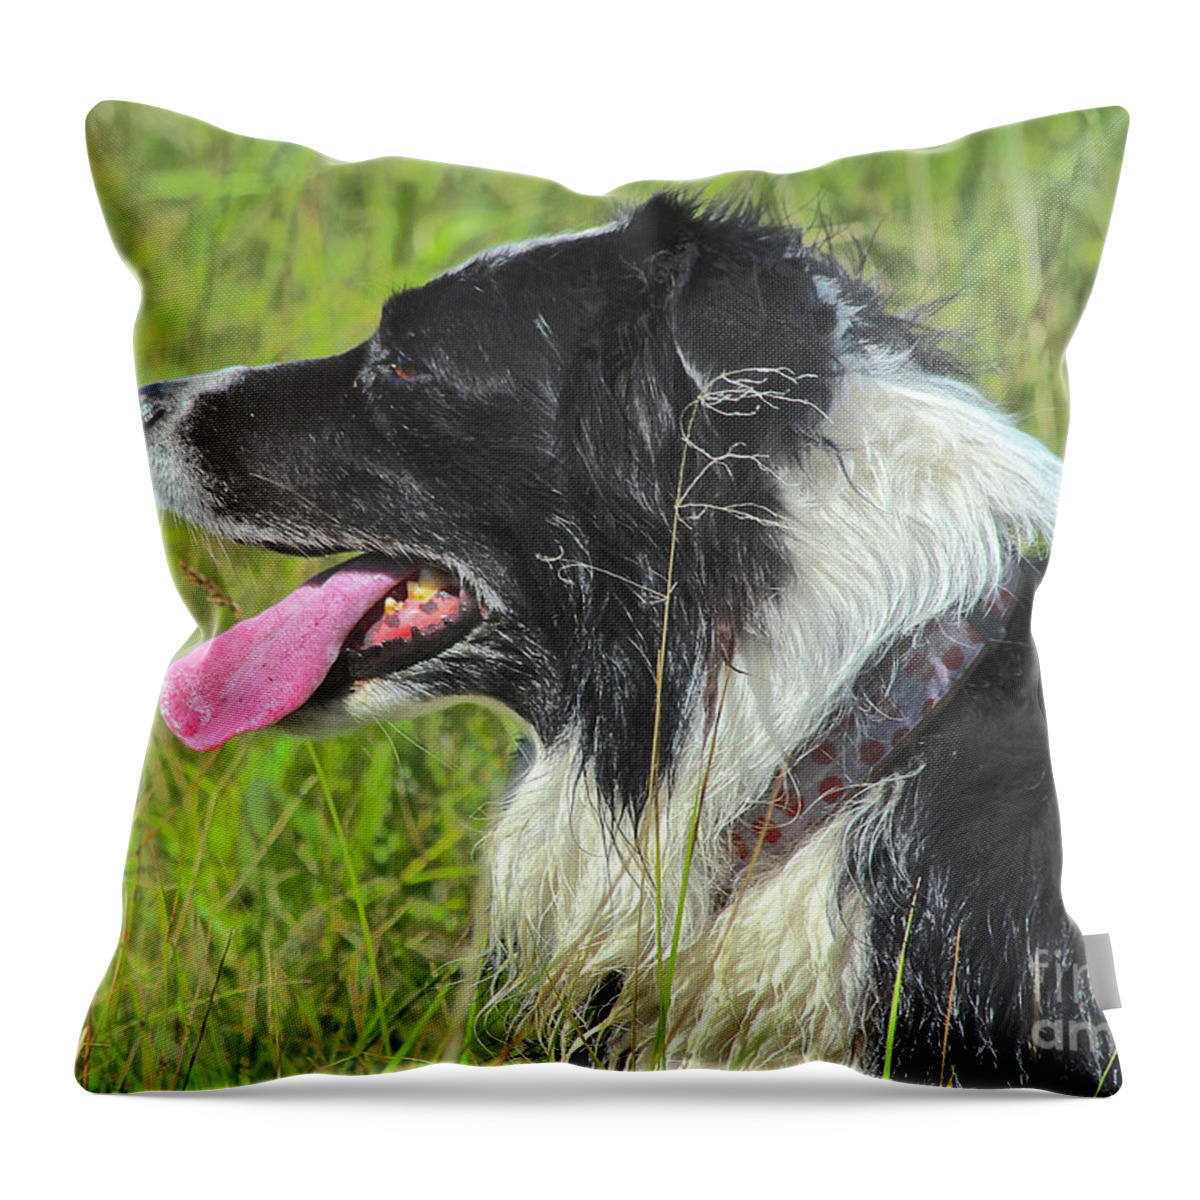 Border Collie Throw Pillow featuring the photograph Resting by Ann E Robson